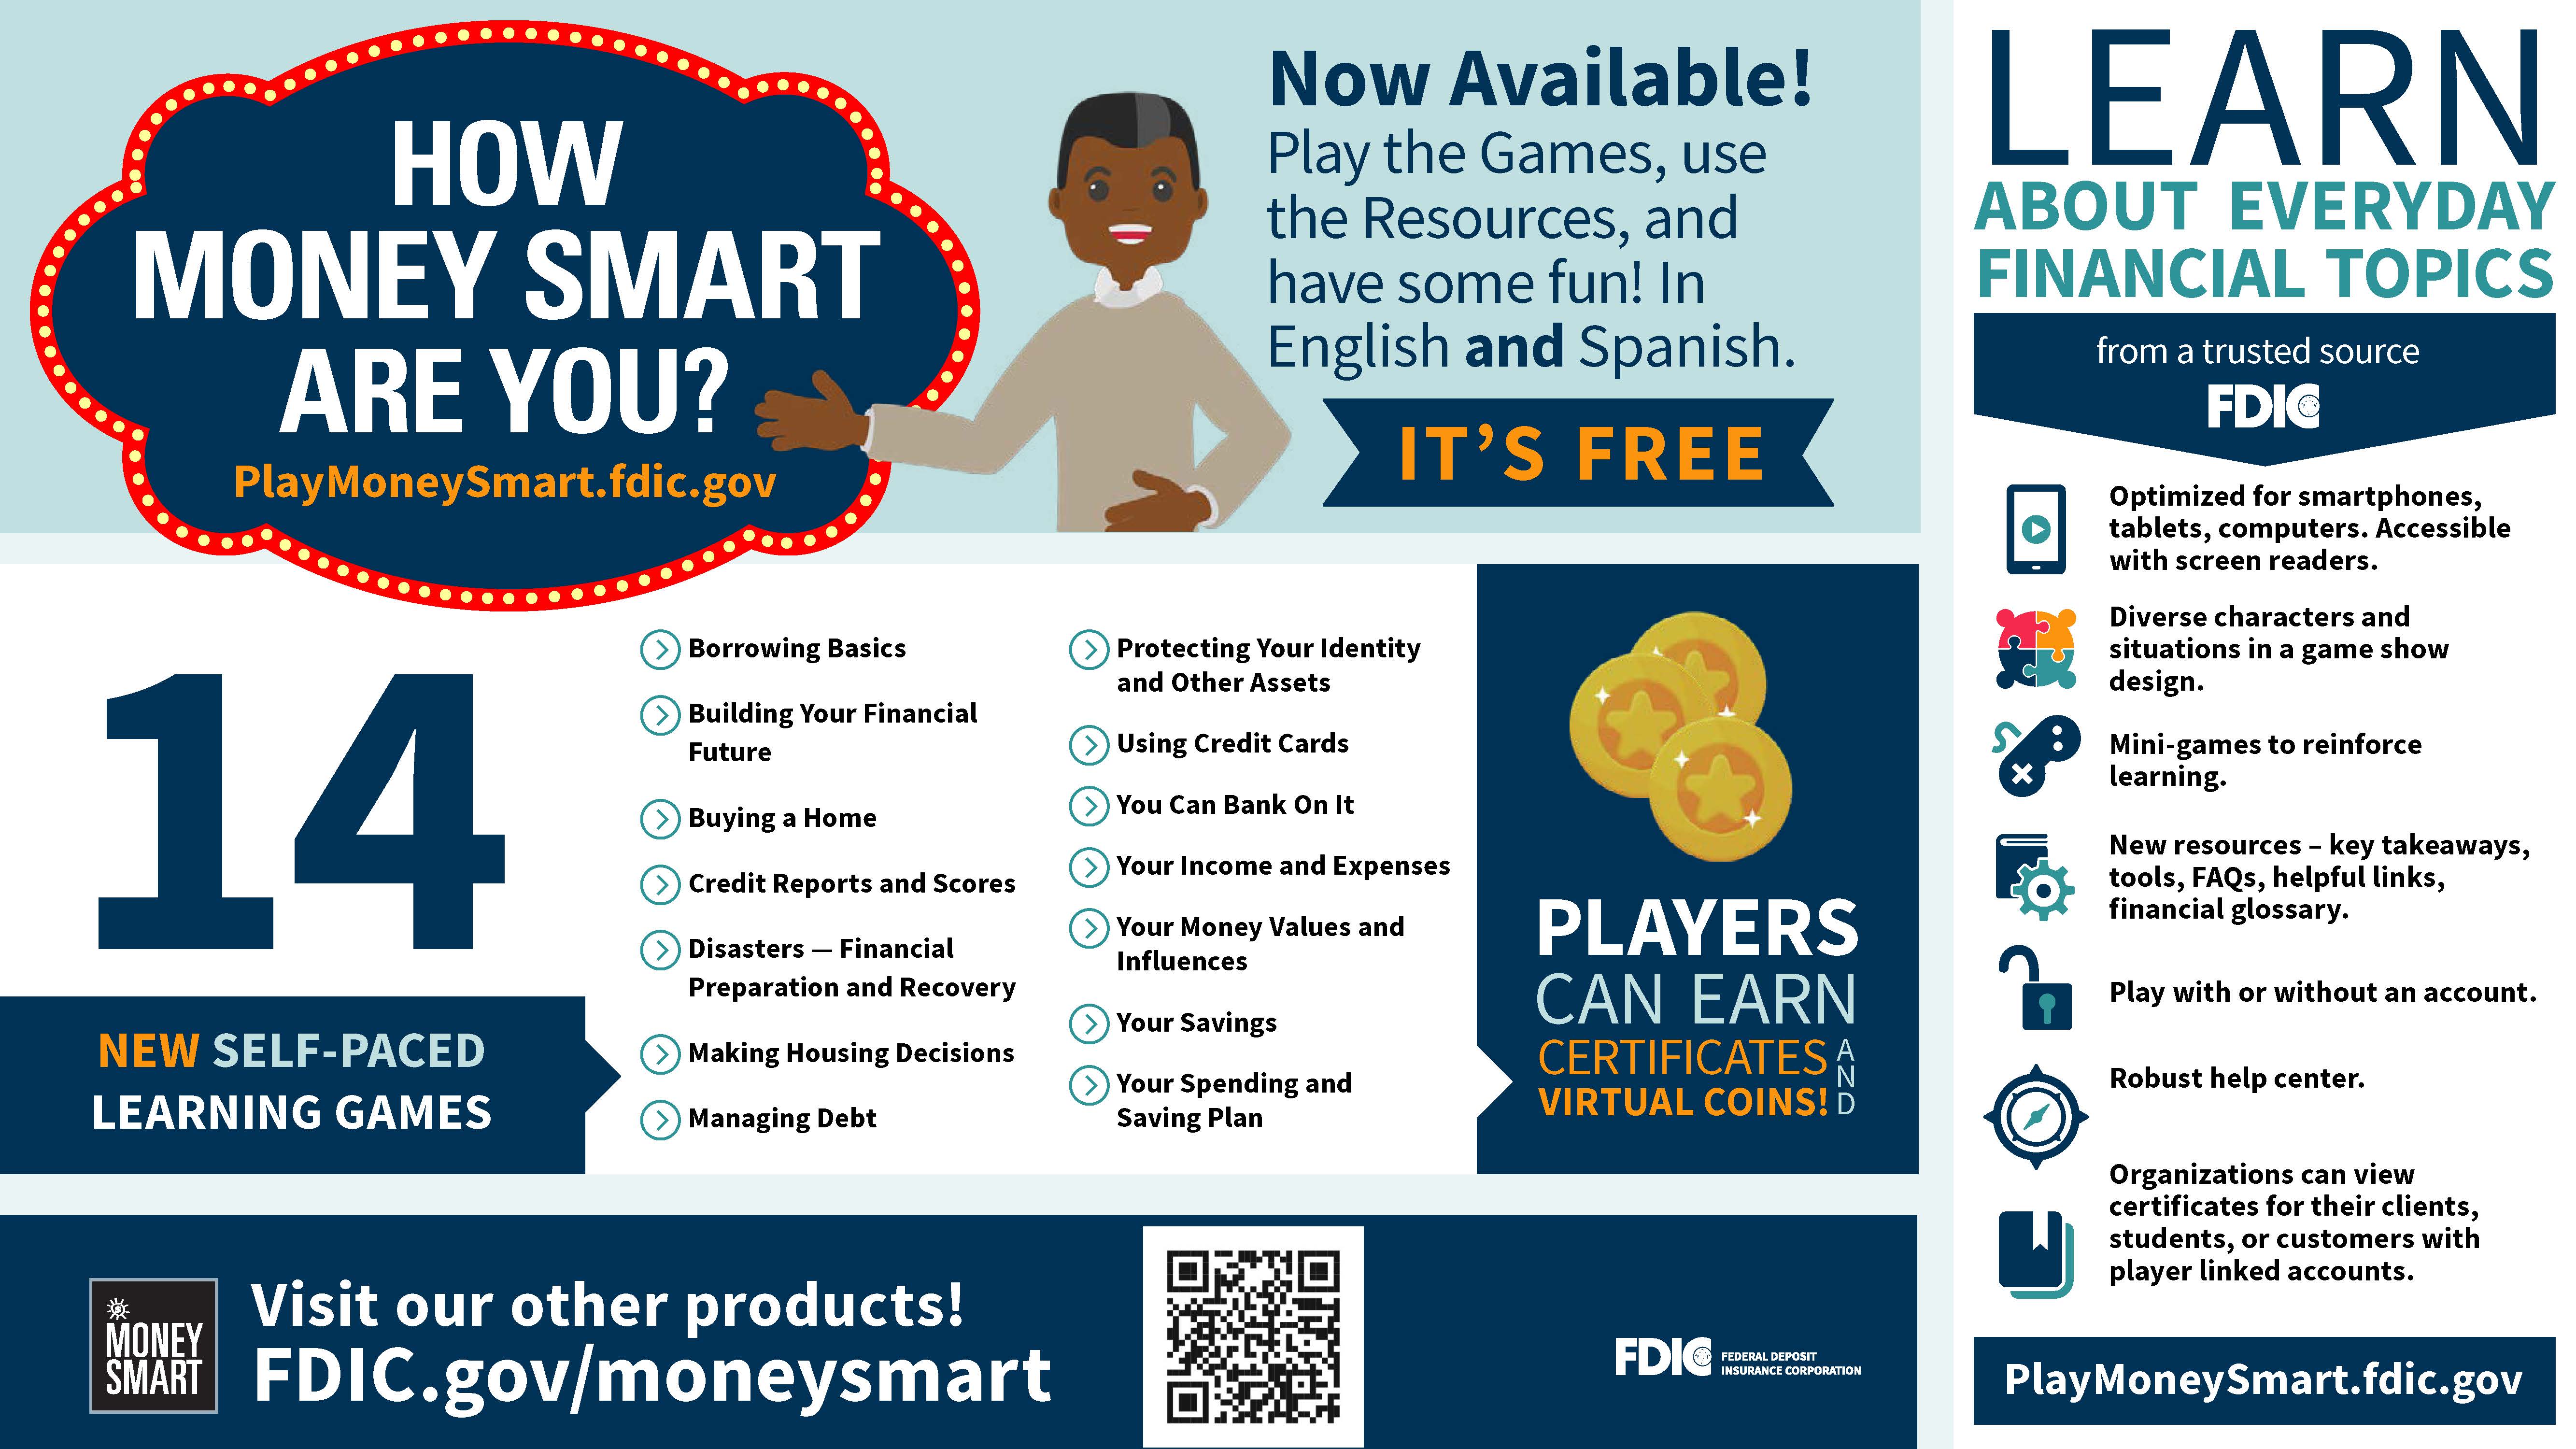 HOW MONEY SMART ARE YOU? PlayMoneySmart.fdic.gov. Now Available! Play the Games, use the Resources, and have some fun! In English and Spanish. ITS FREE. 14 NEW SELF-PACED LEARNING GAMES. Borrowing Basics Building Your Financial Future Buying a Home Credit Reports and Scores Disasters  Financial Preparation and Recovery Making Housing Decisions Managing Debt Protecting Your Identity and Other Assets Using Credit Cards You Can Bank On It Your Income and Expenses Your Money Values and Influences Your Savings Your Spending and Saving Plan. PLAYERS CAN EARN AND VIRTUAL COINS. LEARN ABOUT EVERY DAY FINANCIAL TOPICS from a trusted source FDIC. Optimized for smartphones, tablets, computers. Accessible with screen readers. Diverse characters and situations in a game show design. Mini-games to reinforce learning. New resources  key takeaways, tools, FAQs, helpful links, financial glossary. Play with or without an account. Robust help center. Organizations can view certificates for their clients, students, or customers with player linked accounts. Visit our other products! FDIC.gov/moneysmart